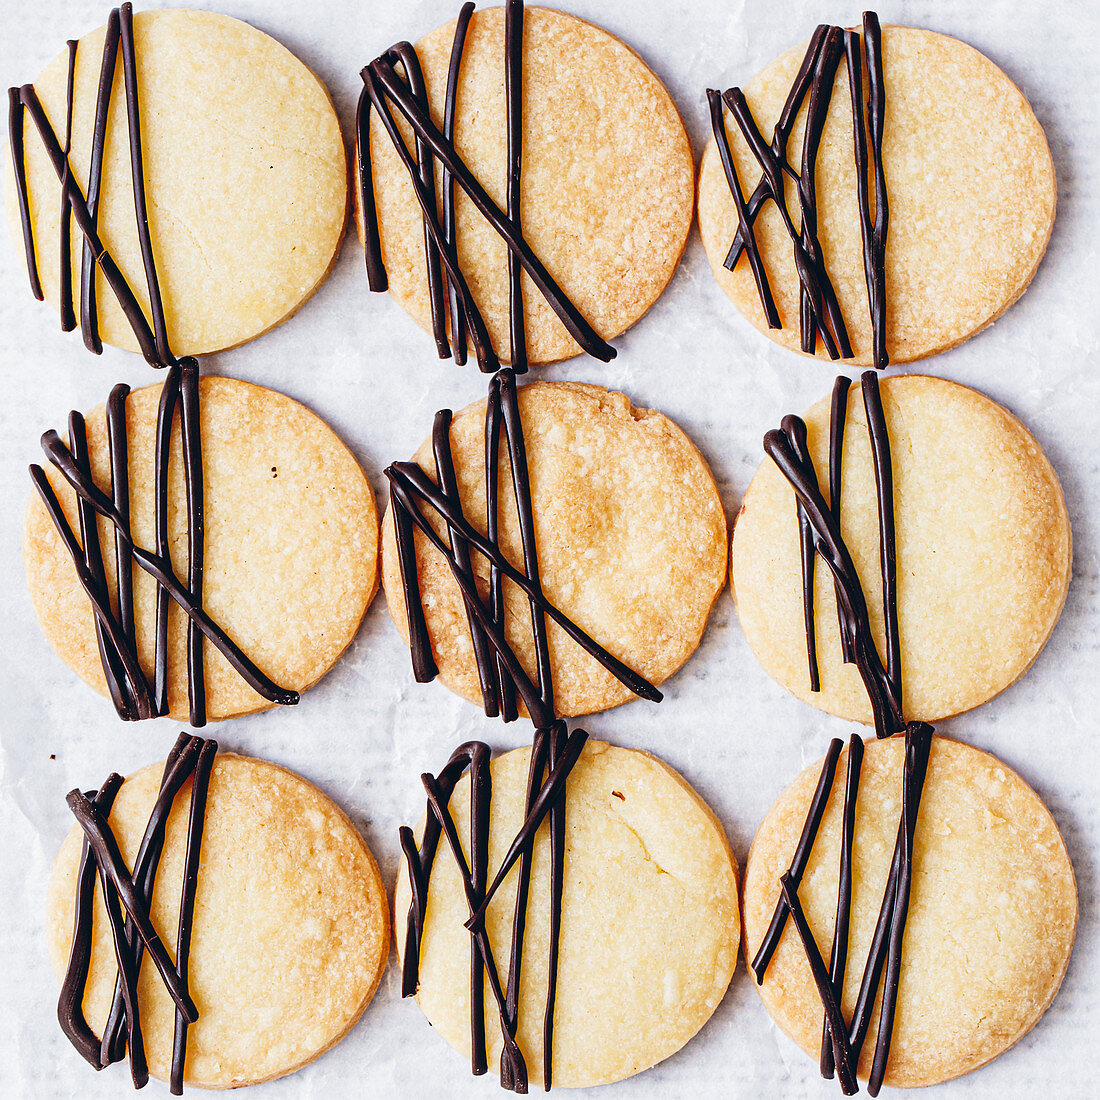 Shortbread cookies with chocolate